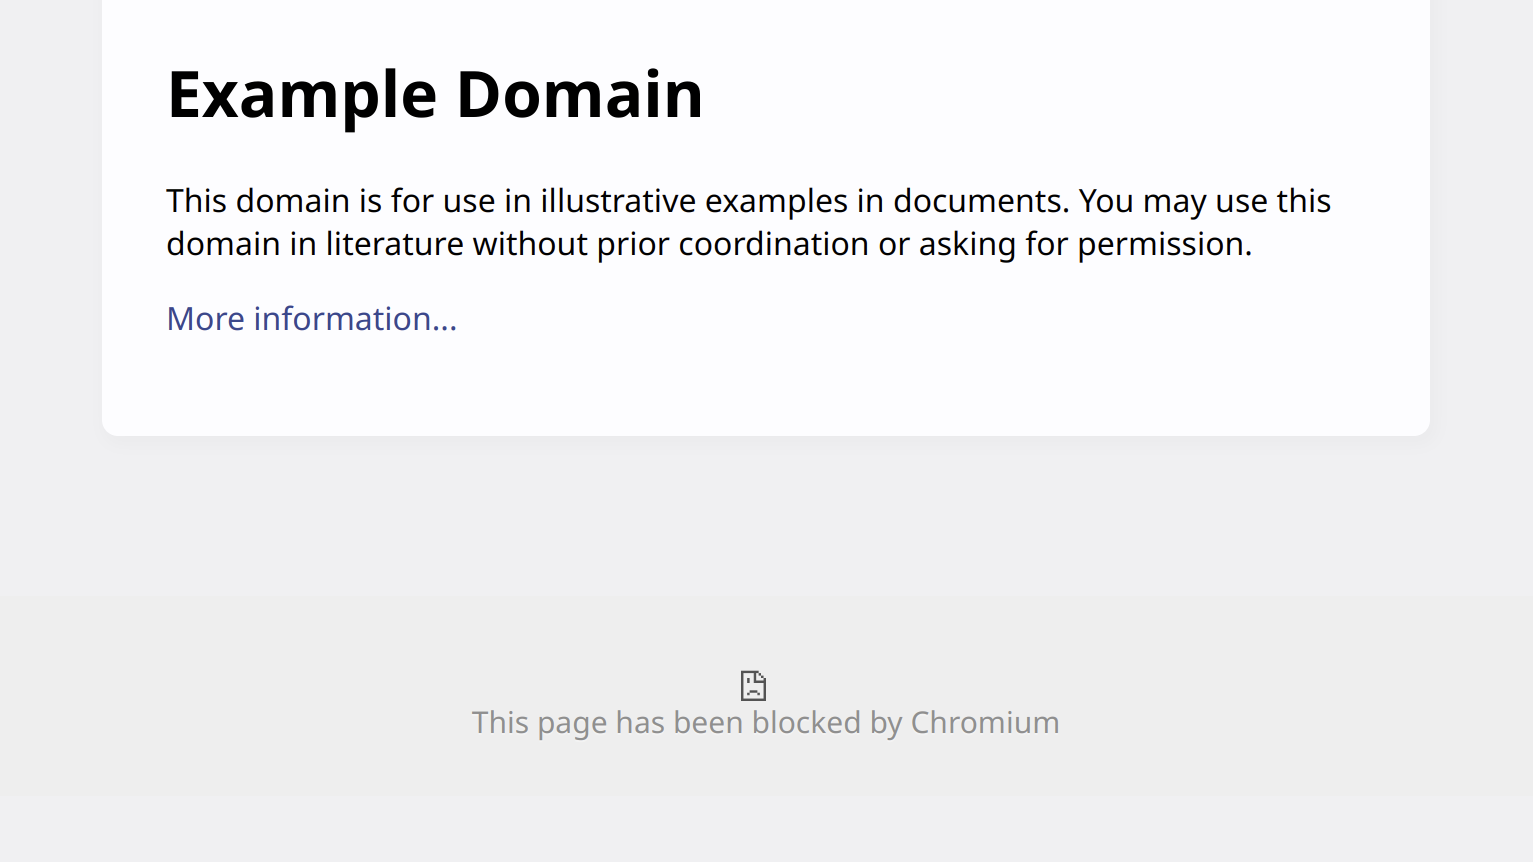 Screenshot of the example domain. Below the usual content the “sad page” symbol is displayed and the text “This page has been blocked by Chromium.”